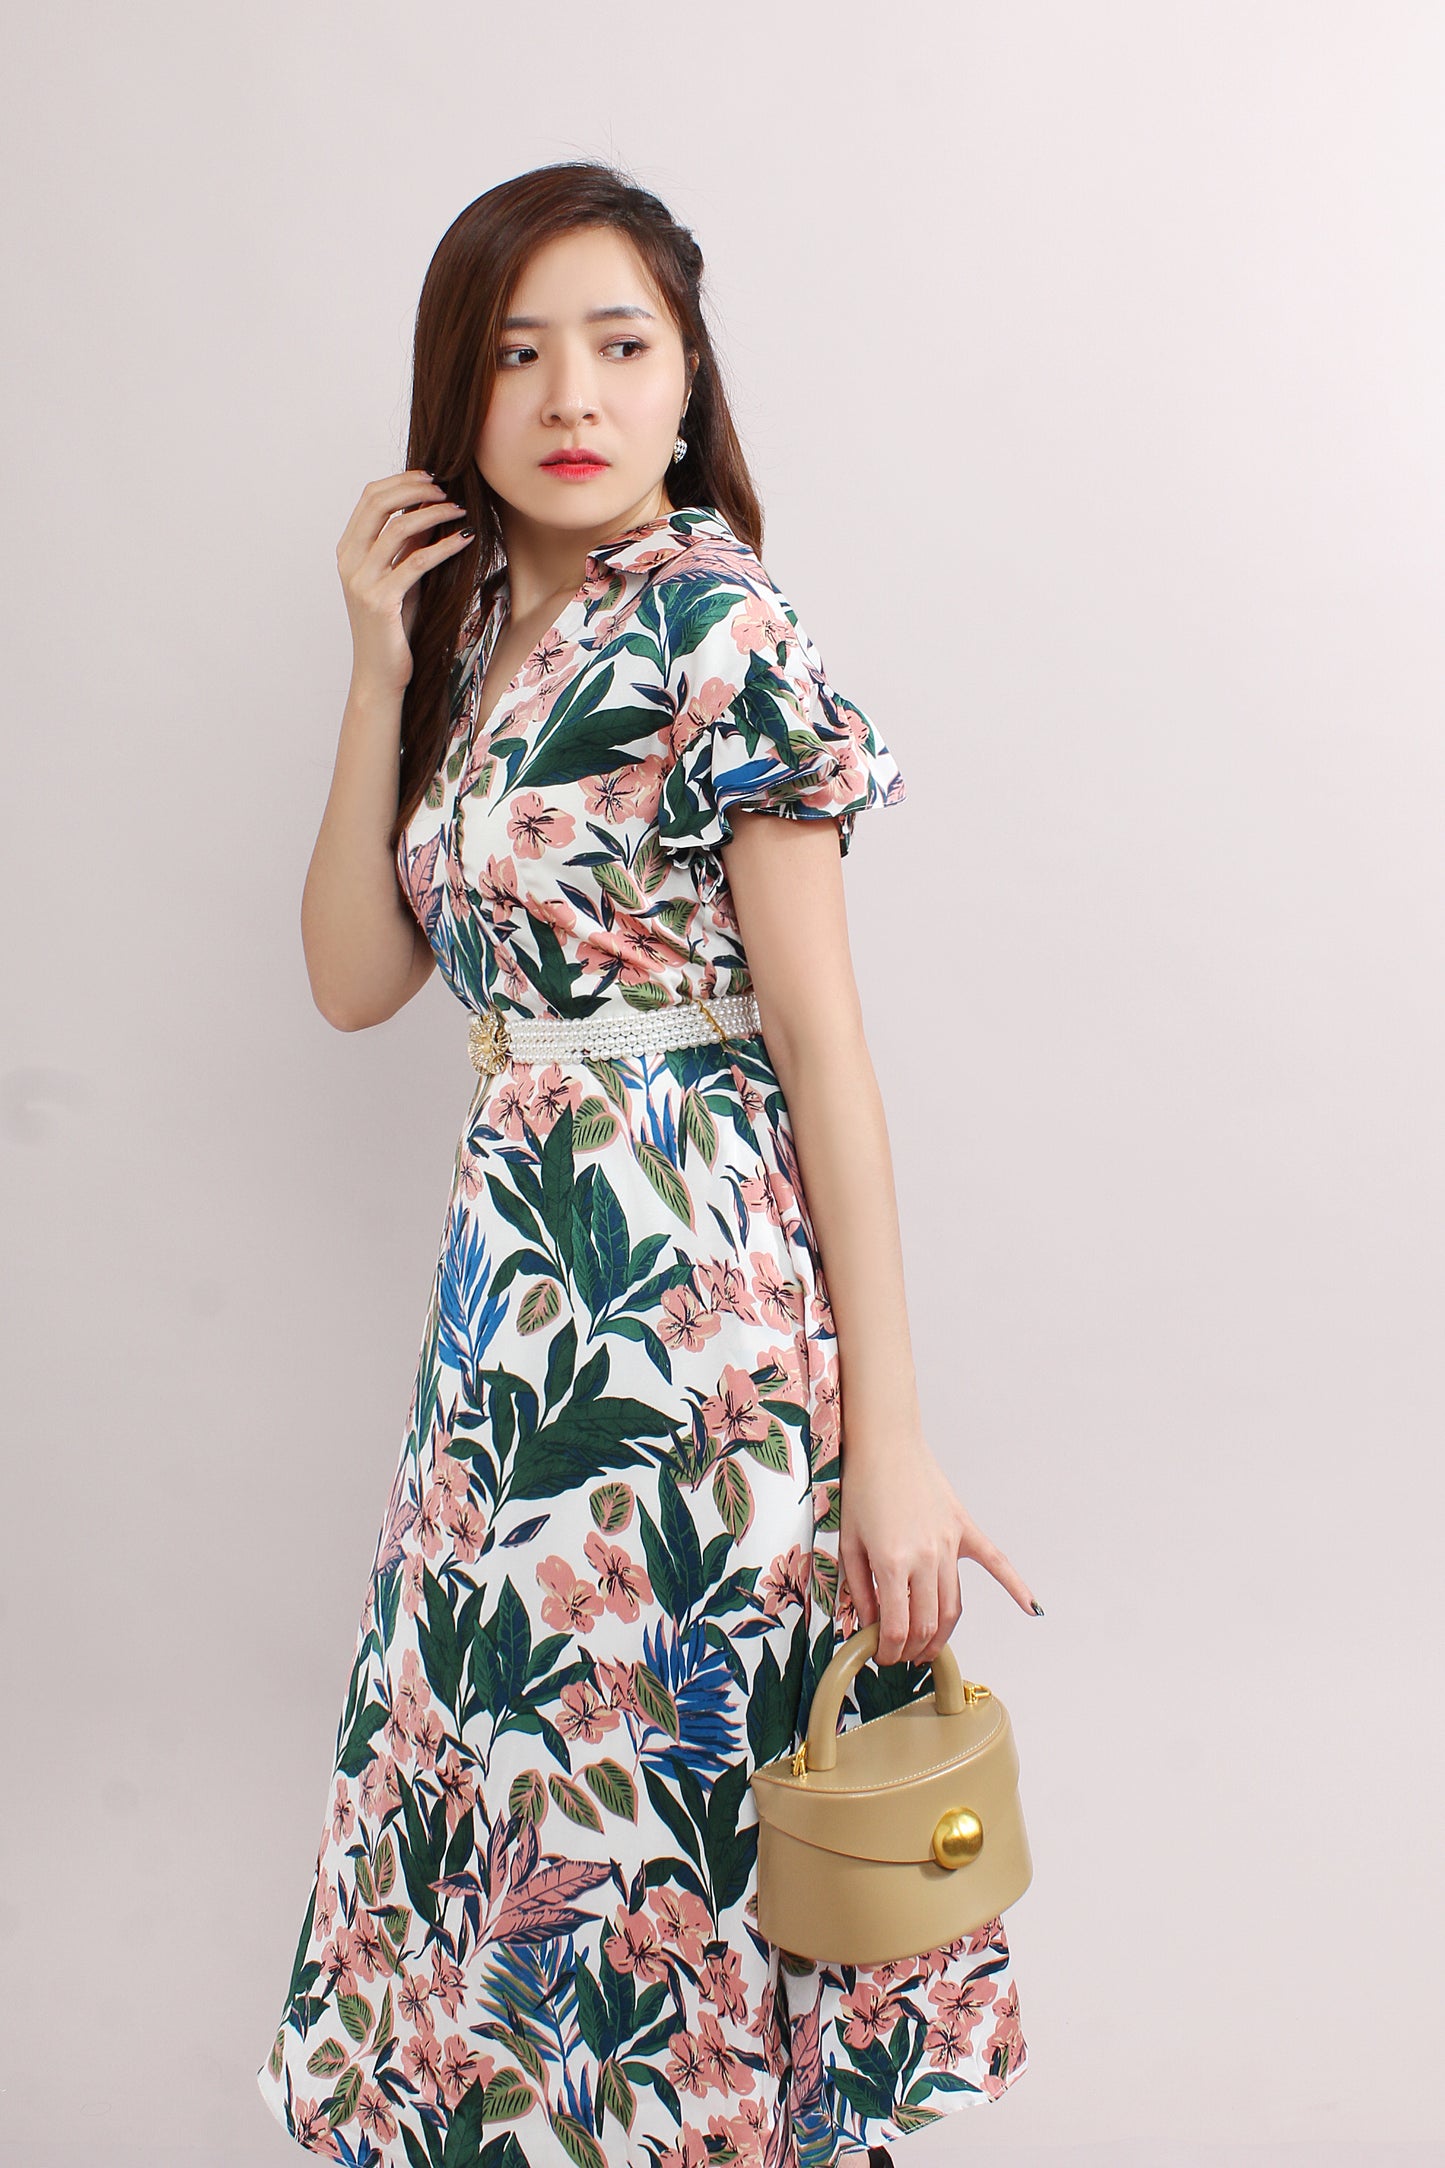 Bright Floral Dress With Ruffled Sleeves